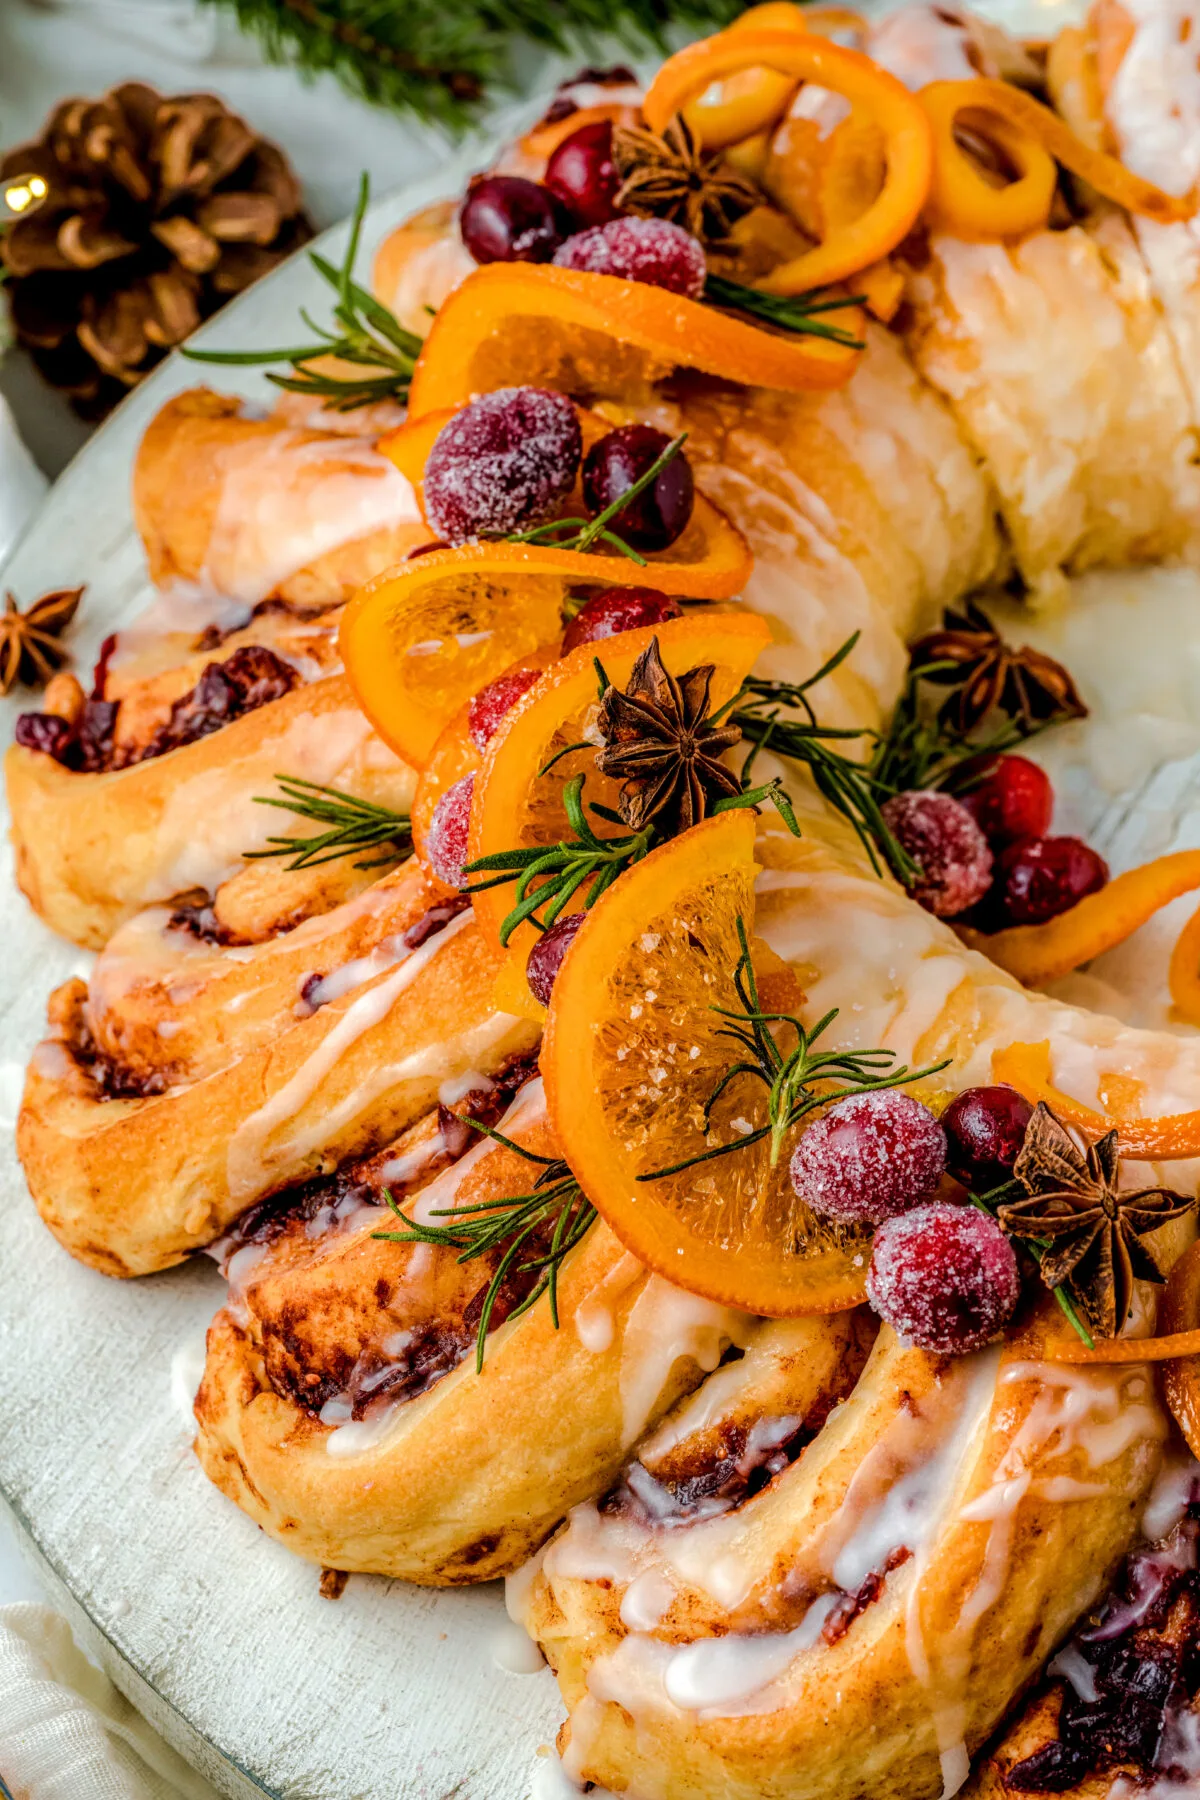 Make your holiday season extra special with this delicious Cranberry Orange Cinnamon Roll Wreath. It's sure to be a hit at any holiday party!